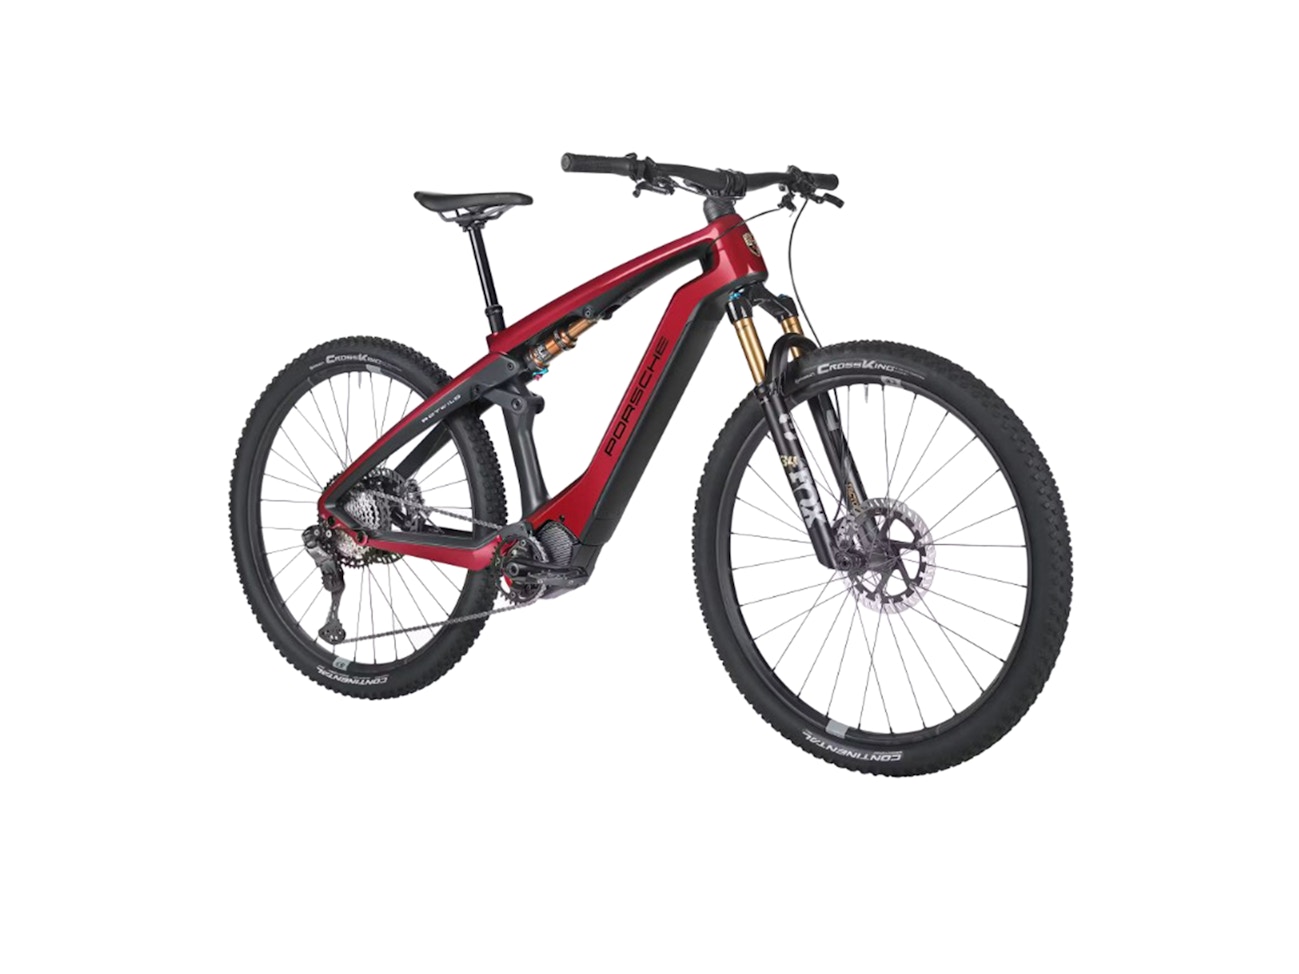 High-performance exclusive electric mountain bike from Porsche.